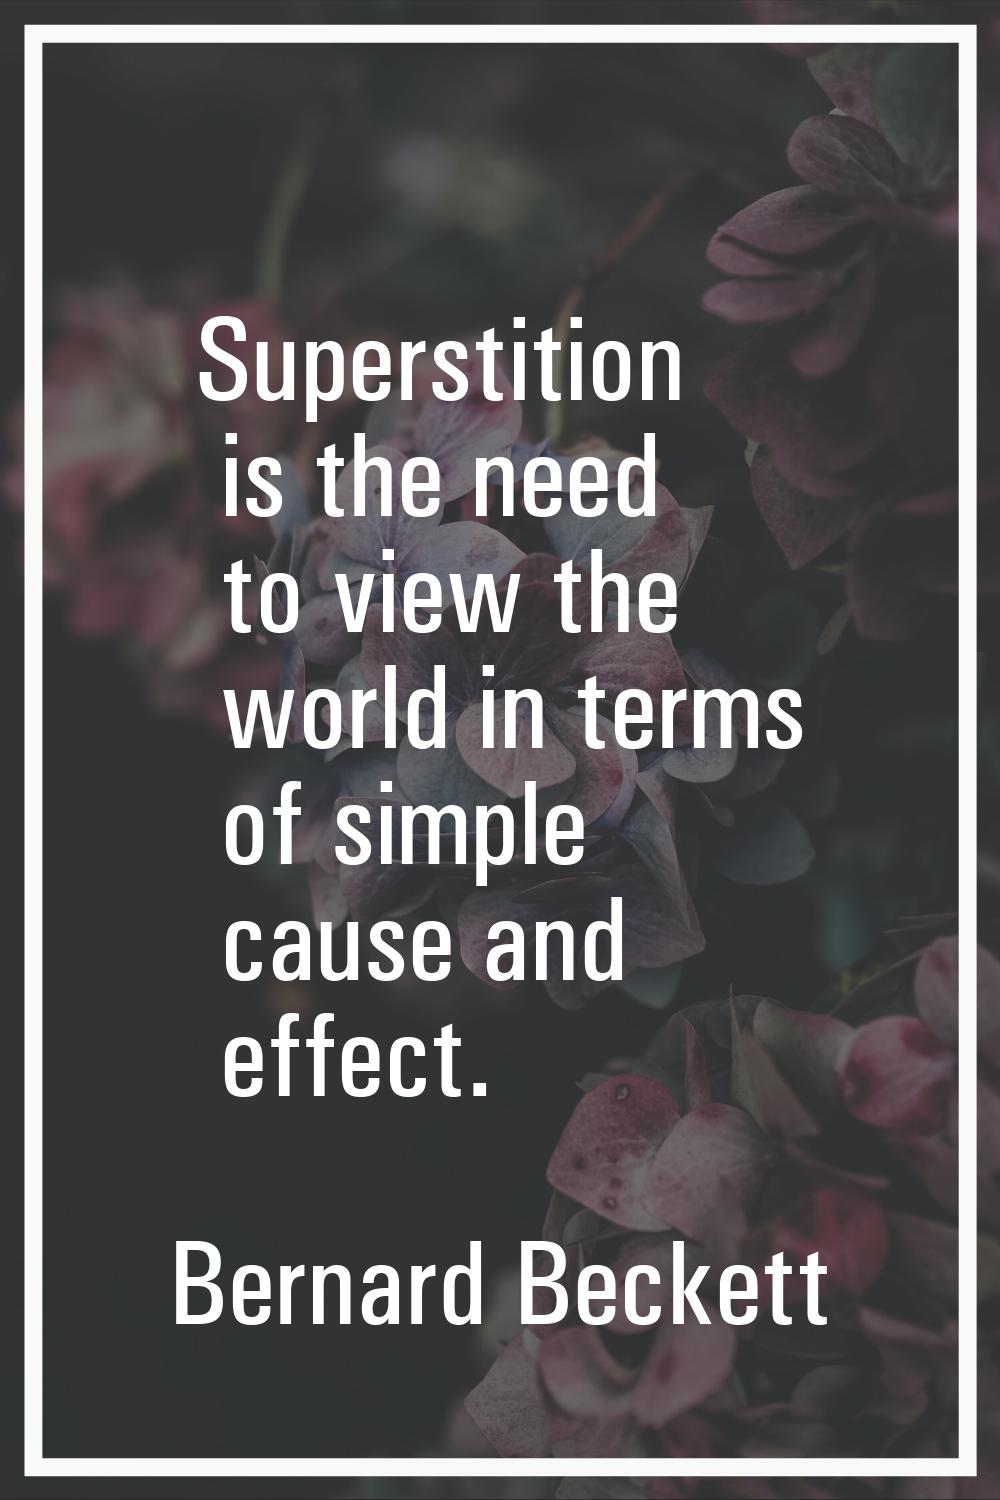 Superstition is the need to view the world in terms of simple cause and effect.